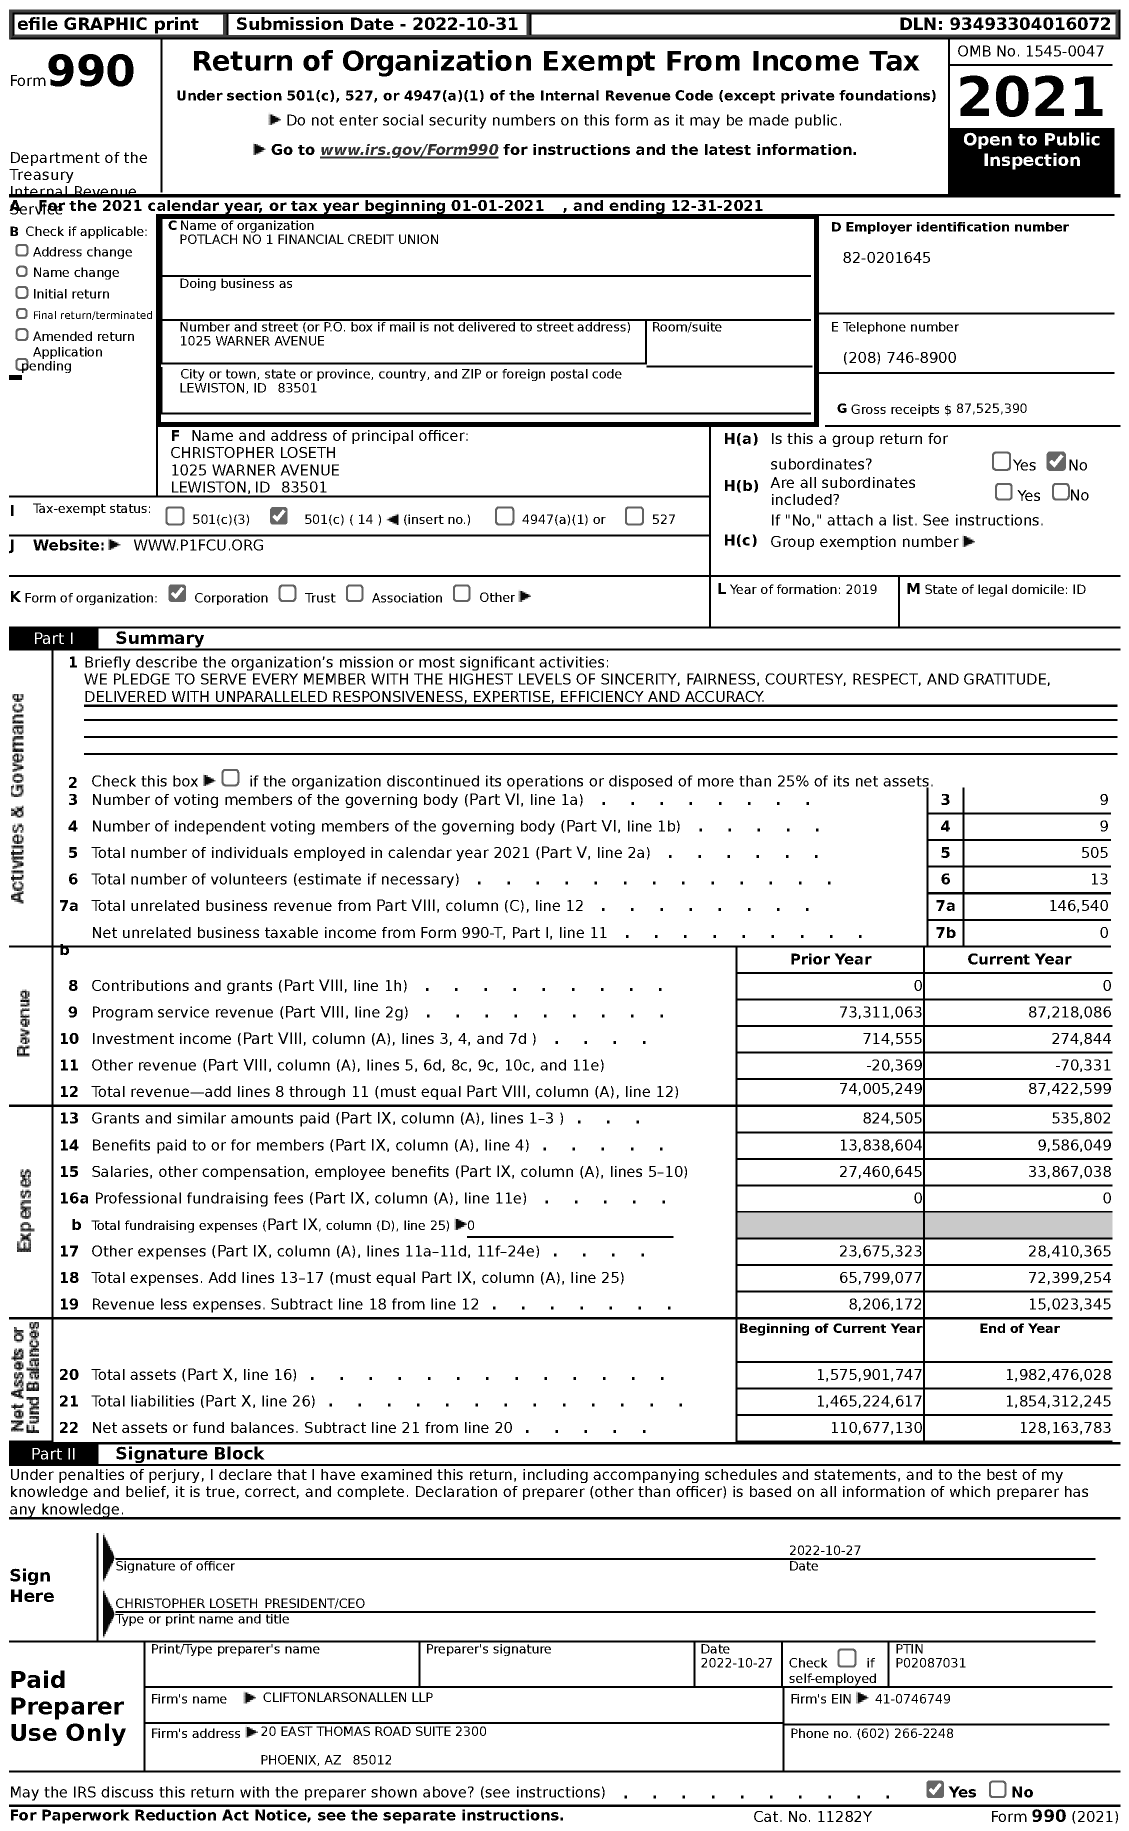 Image of first page of 2021 Form 990 for Potlach No 1 Financial Credit Union